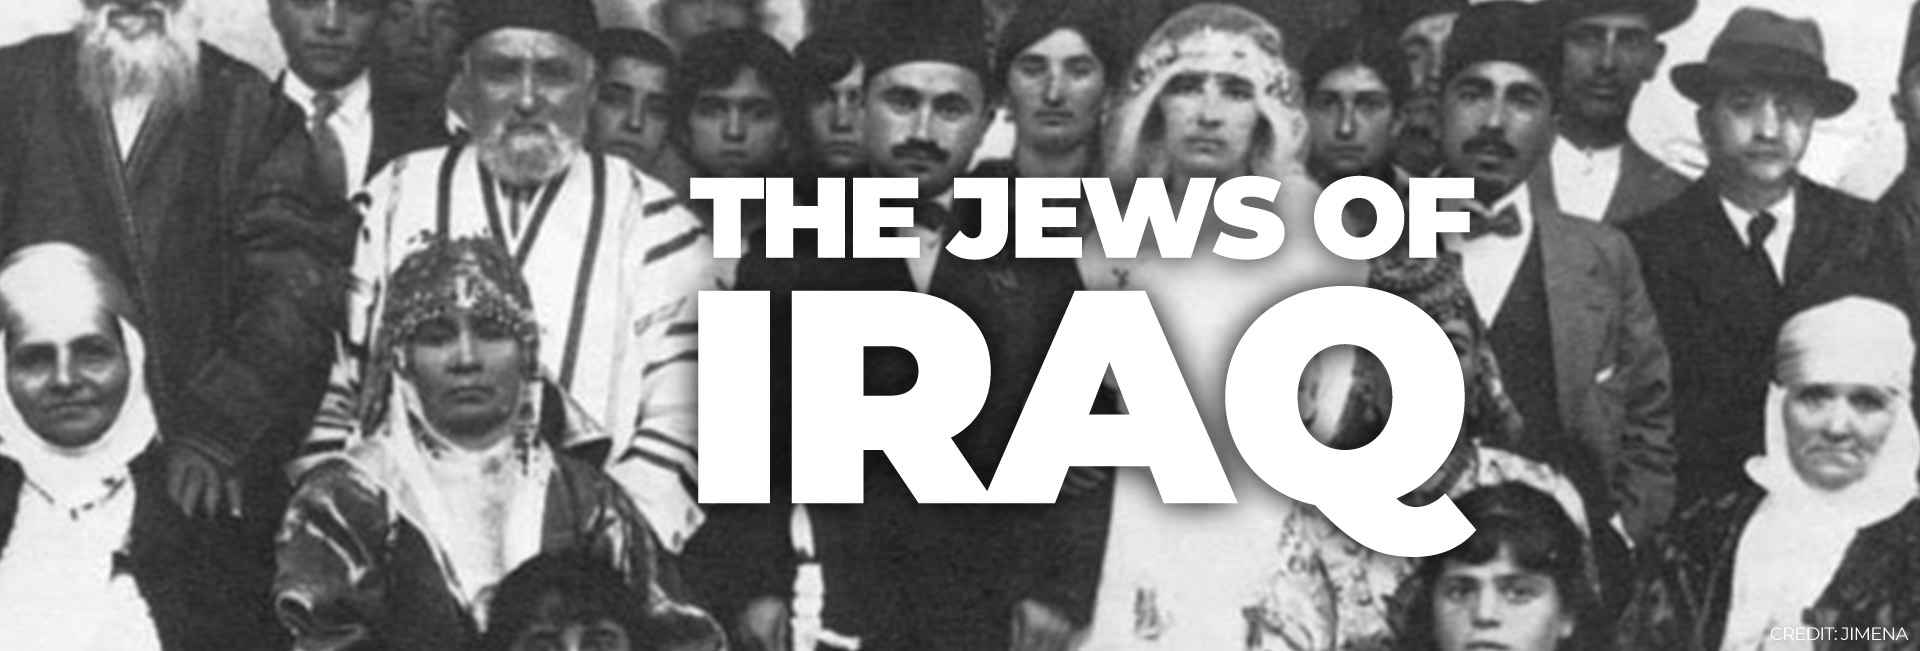 The Jews of Iraq – A History of Violence